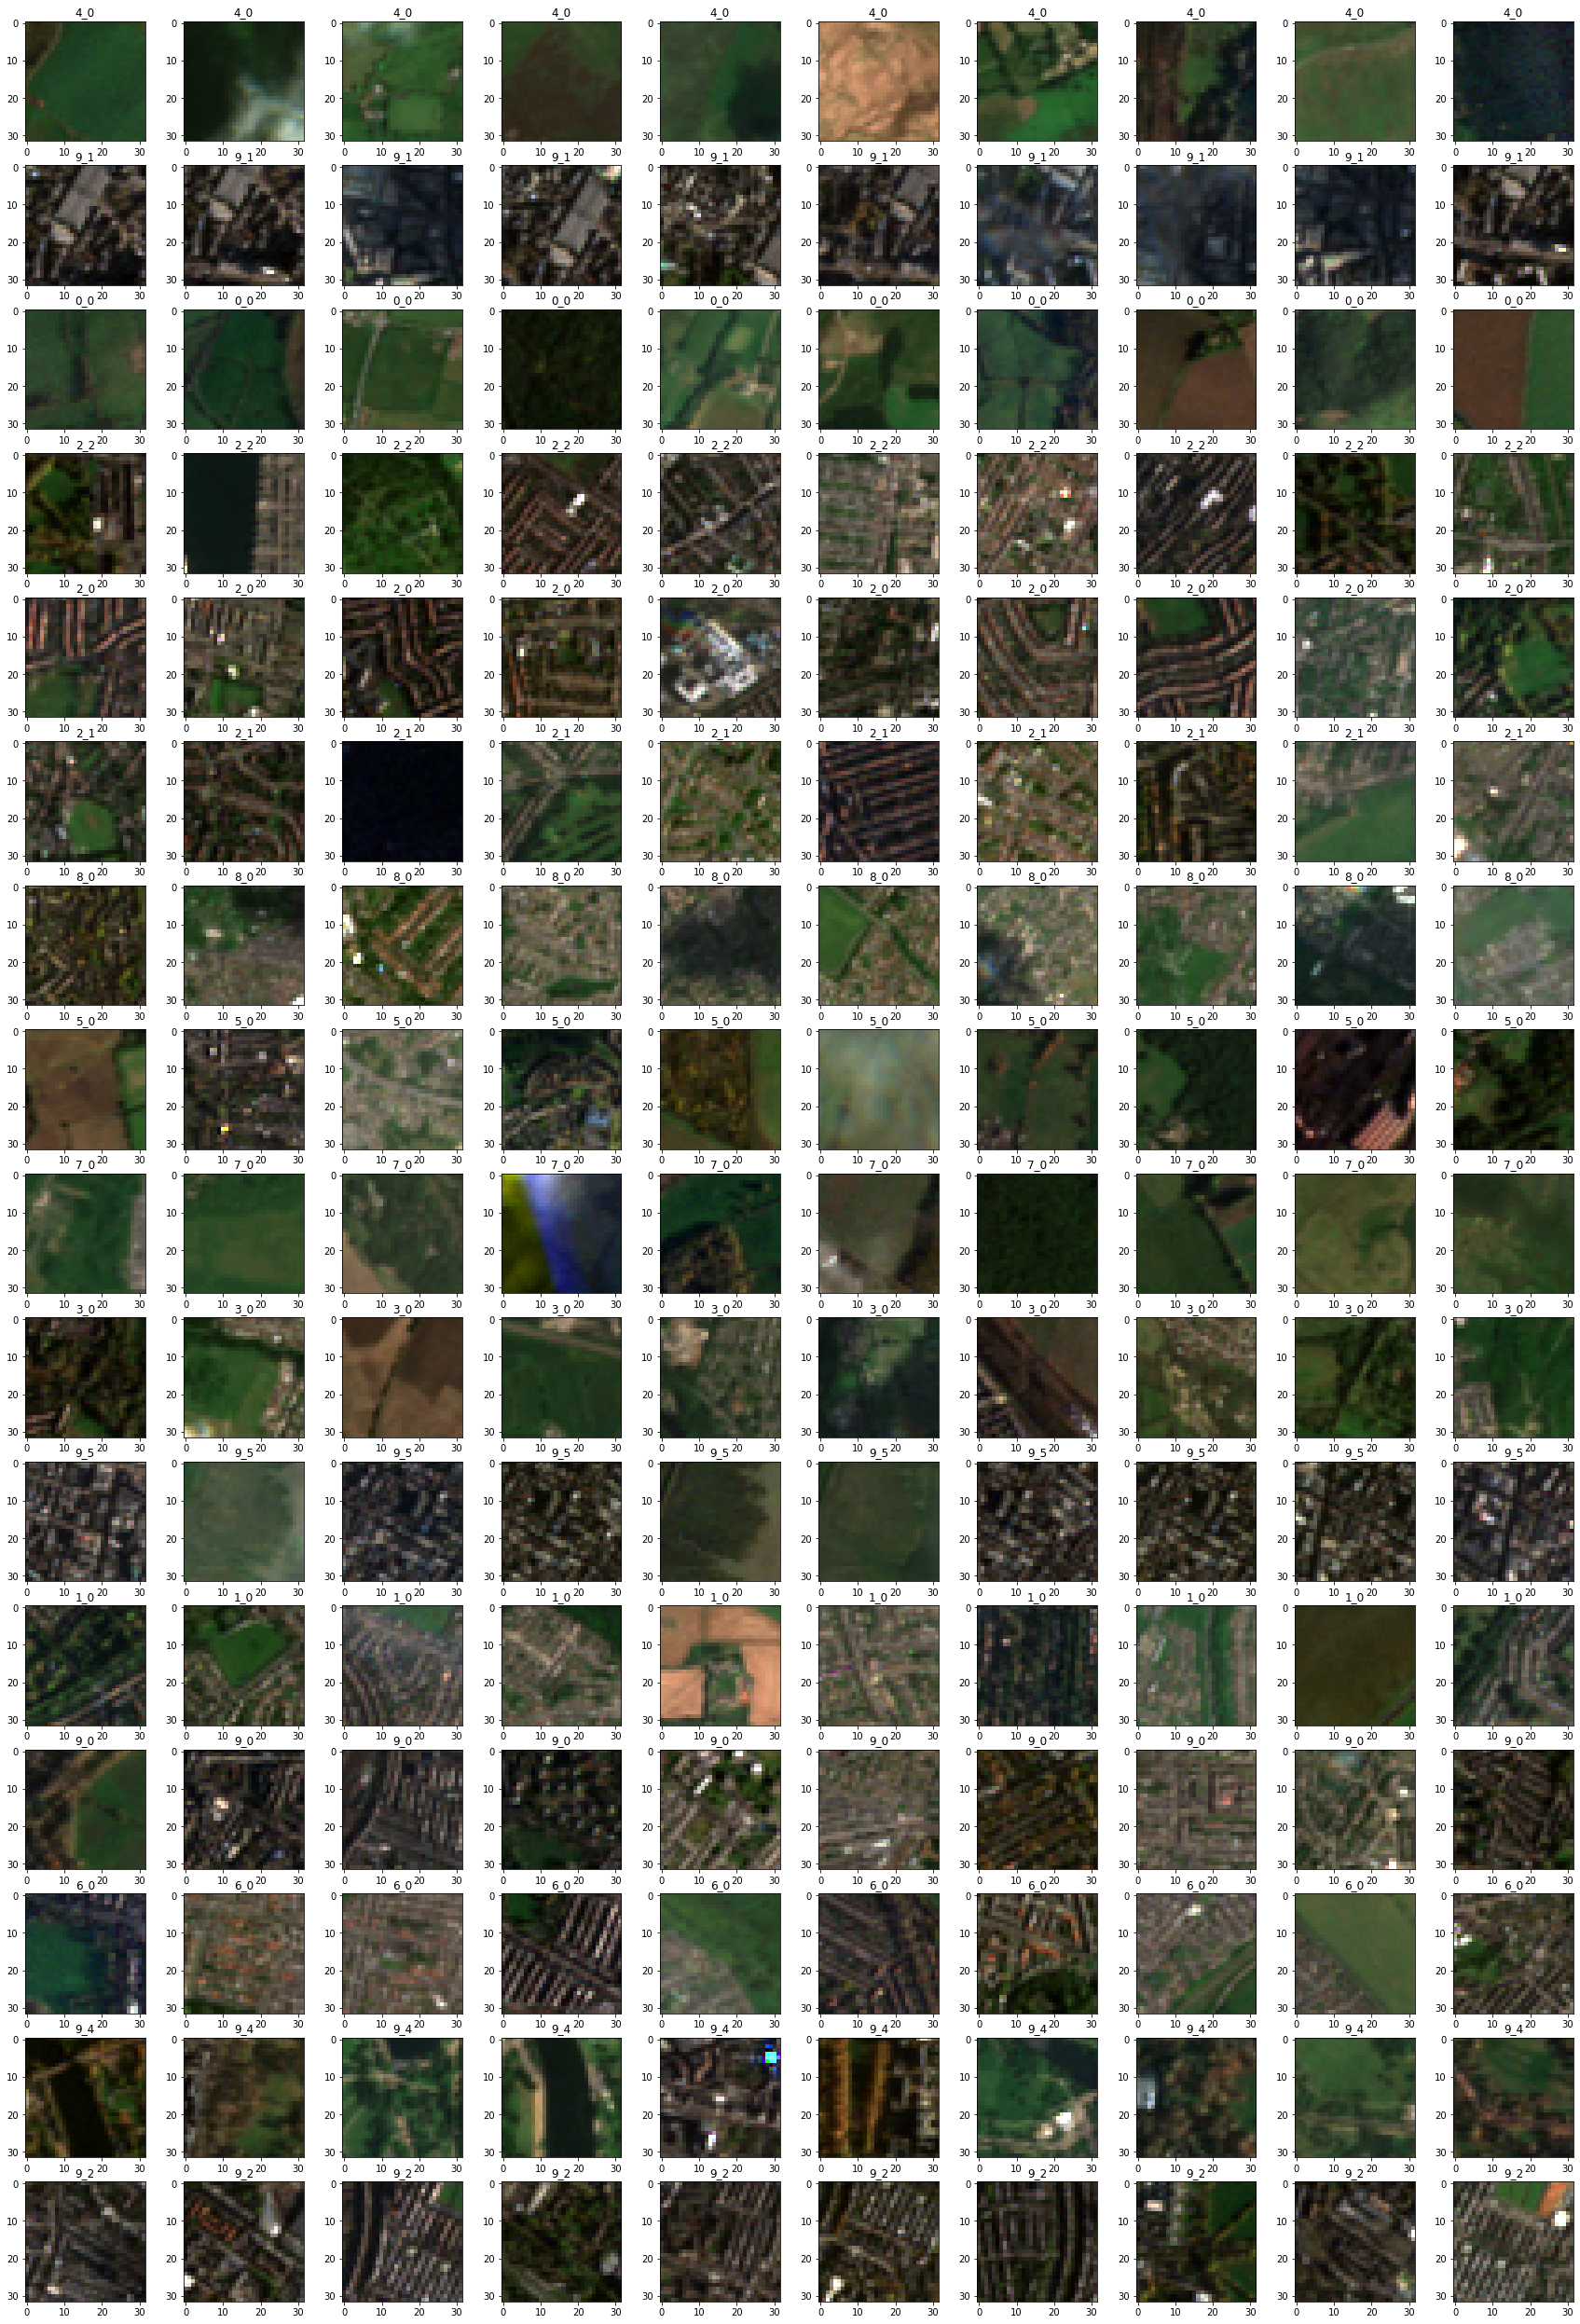 ../_images/check_temporal_tiles_5_0.png